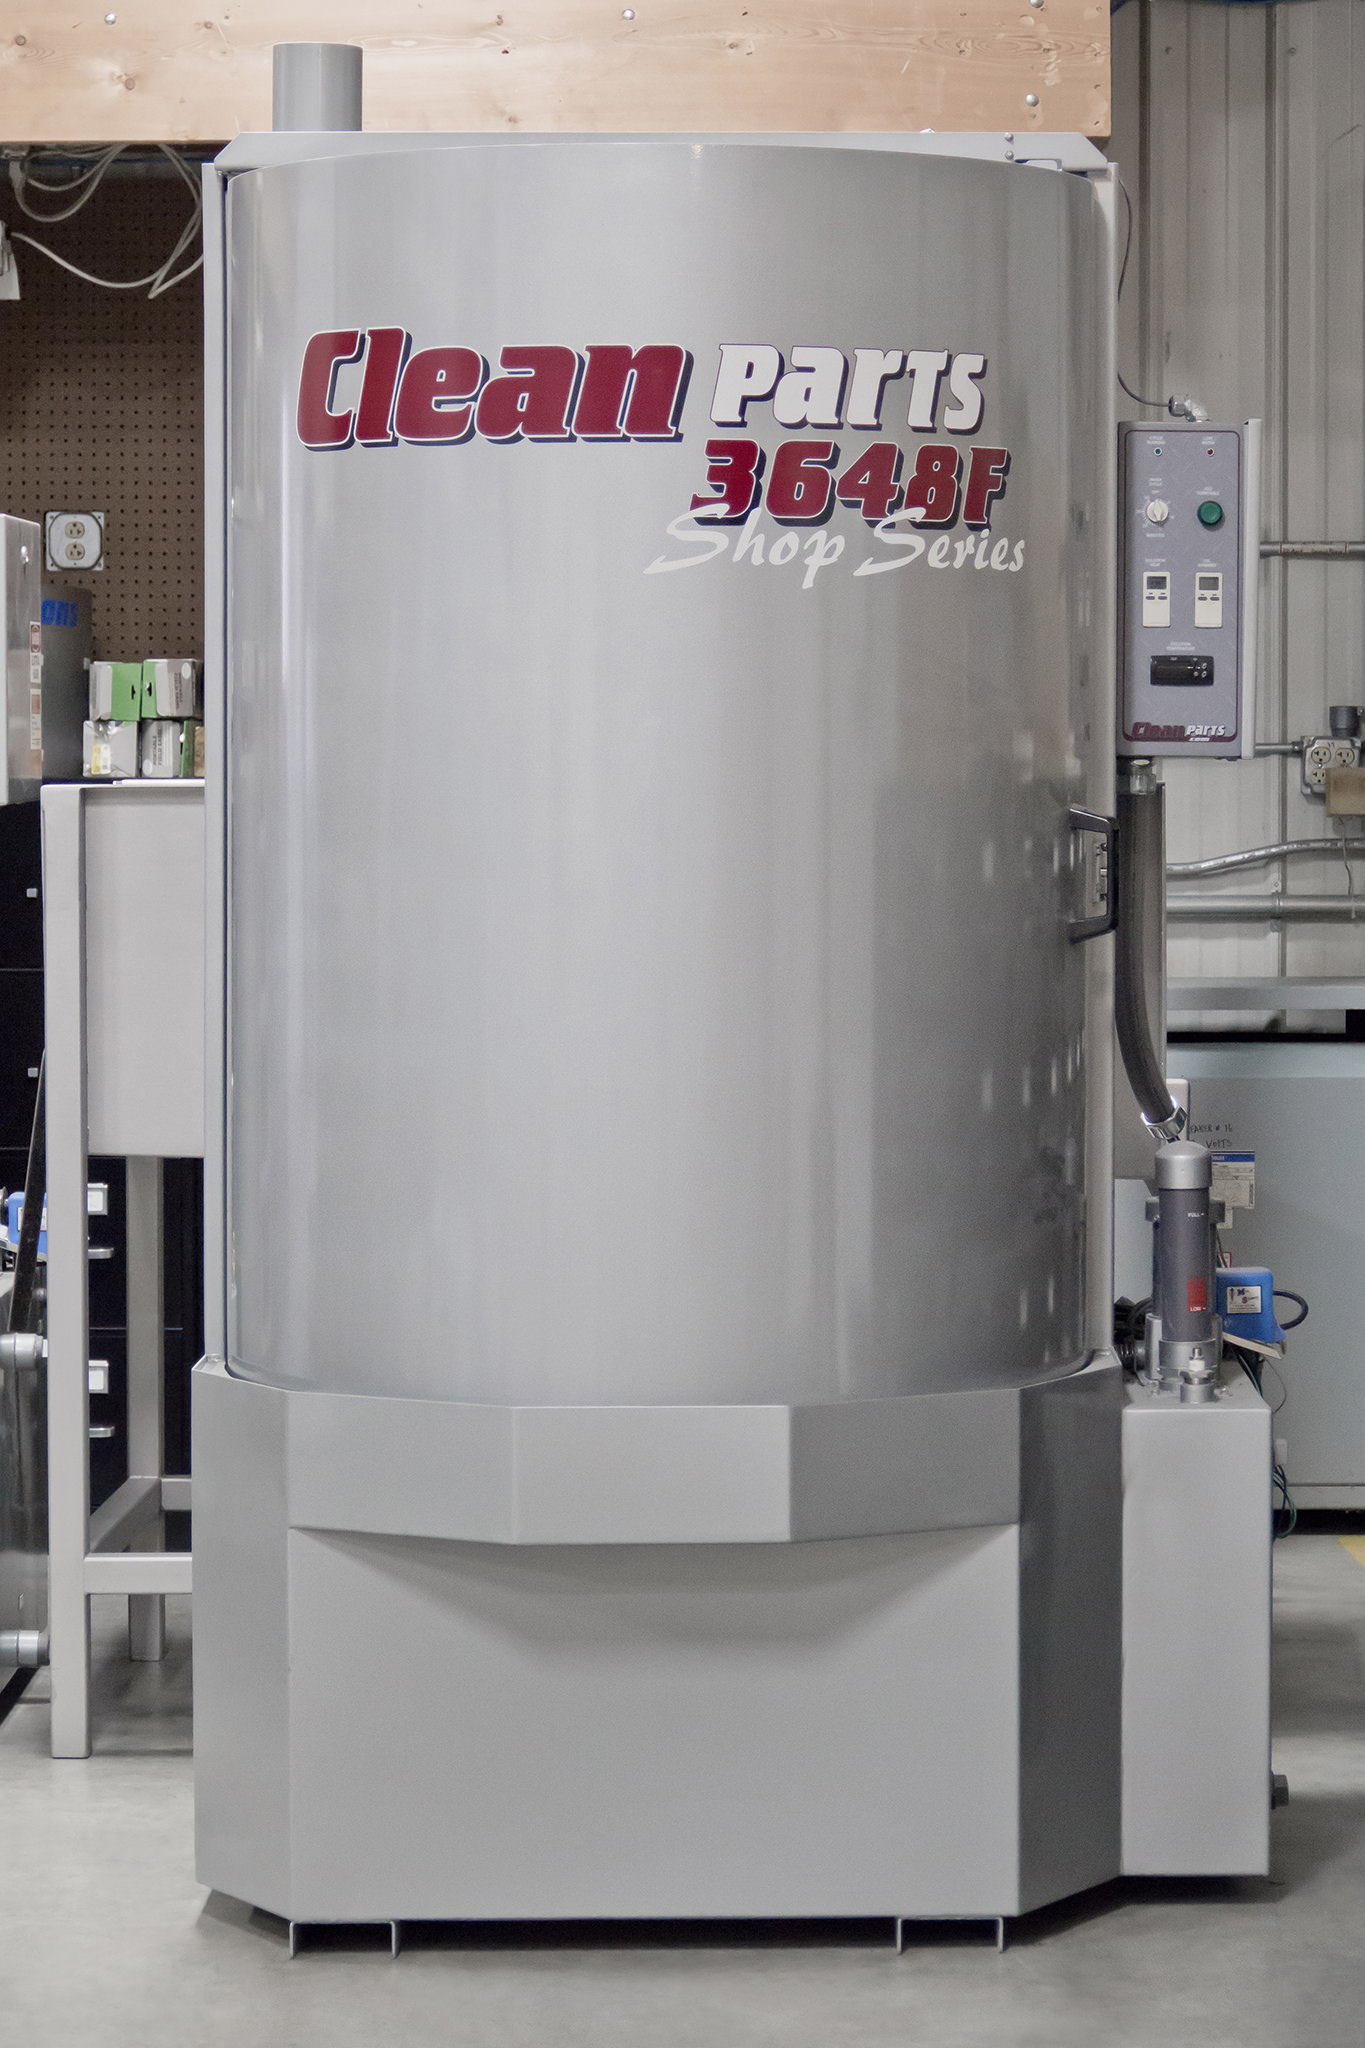 CleanParts 3648F Shop Series